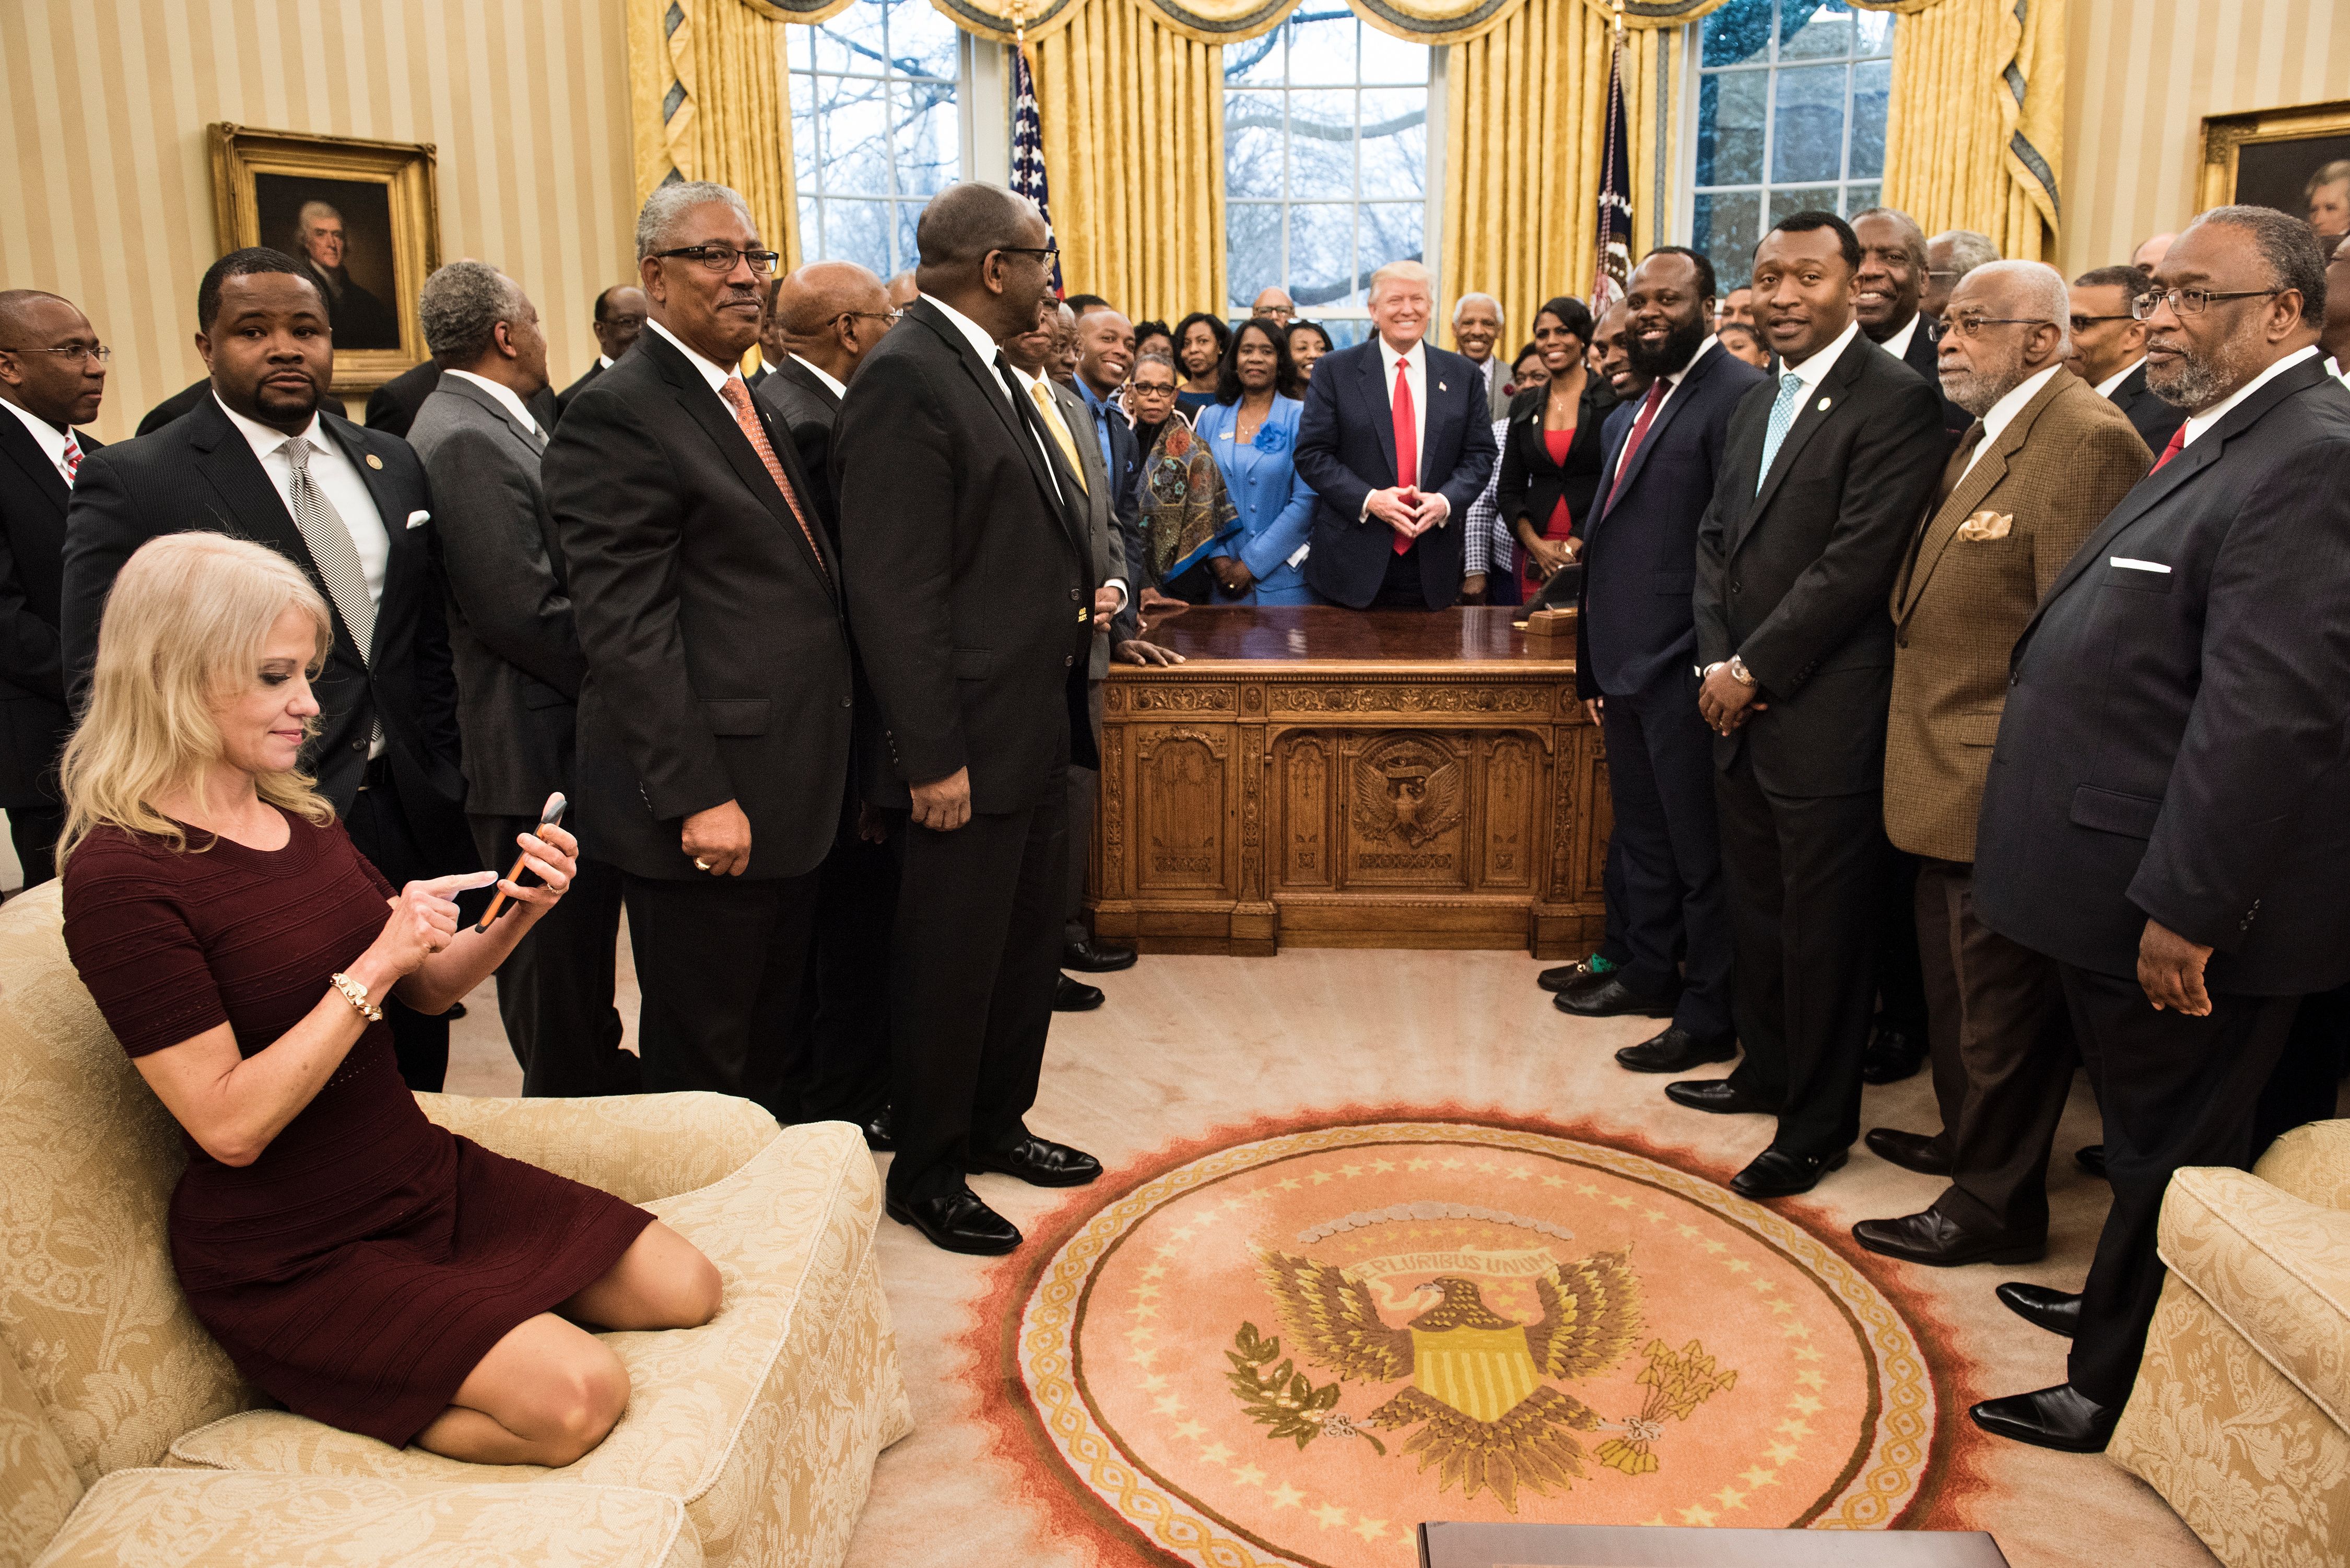 Kellyanne Conway, counselor to the President, checks her phone after taking a photo as President Trump and leaders of historically black universities and colleges pose for a group photo in the Oval Office of the White House in Washington, D.C., on Feb. 27, 2017.